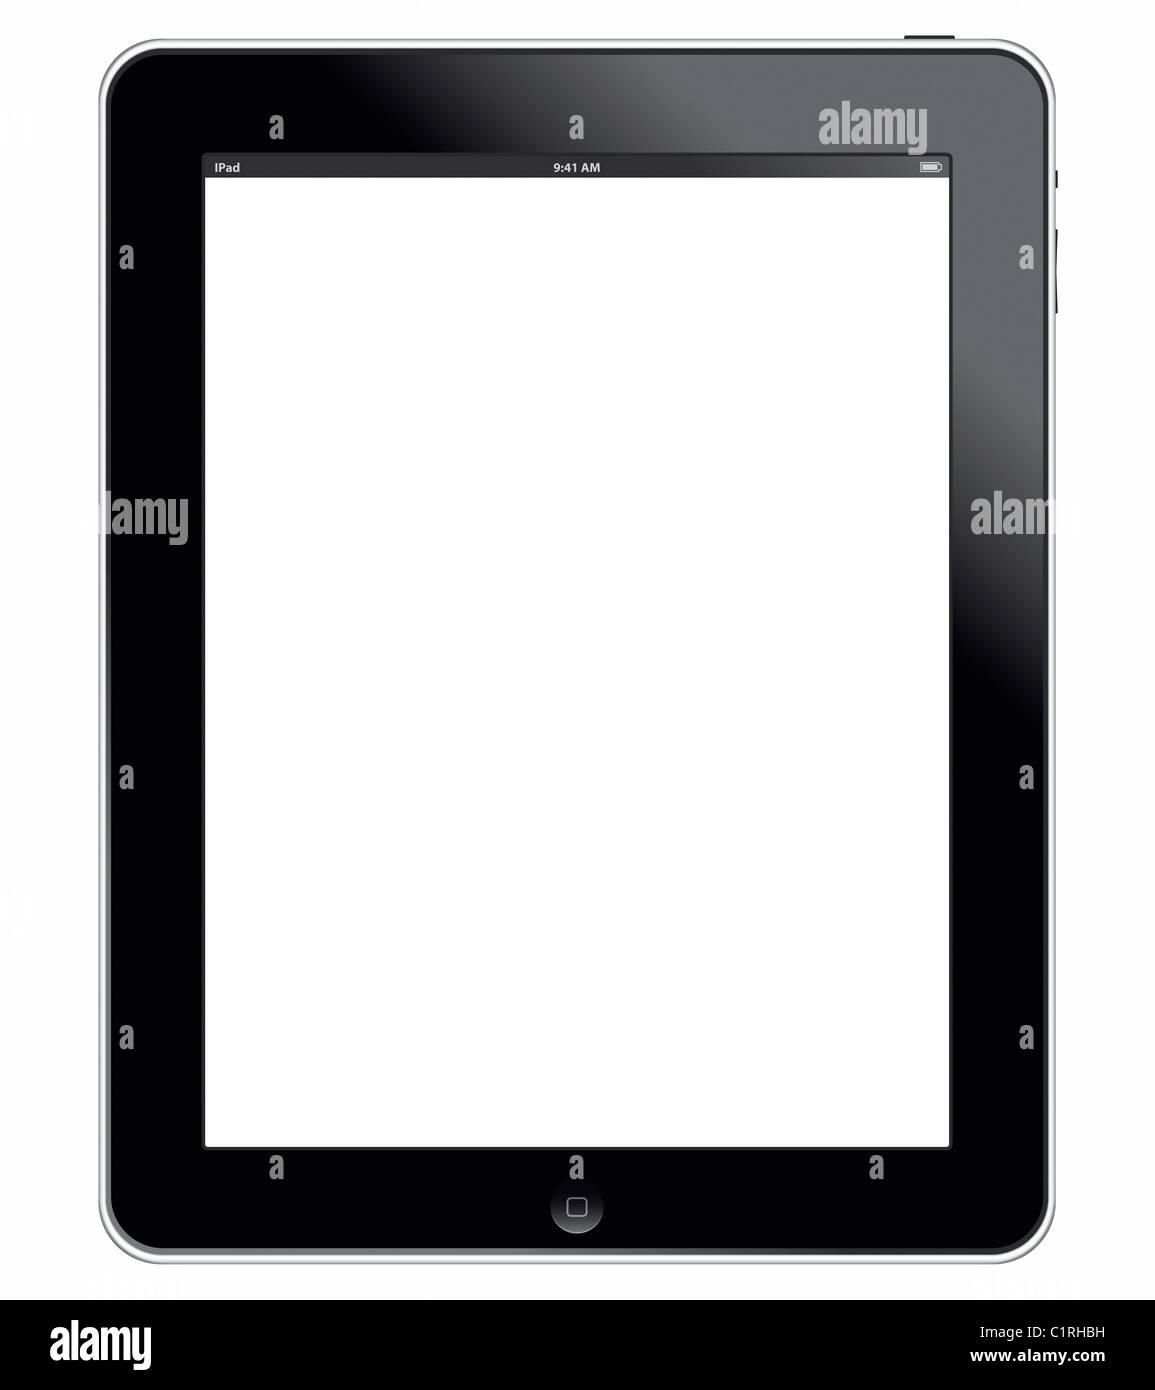 Muenster, Germany - March 24, 2011: Illustration shows the Apple ipad 3G+Wifi digital tablet computer with multi touch screen. Stock Photo